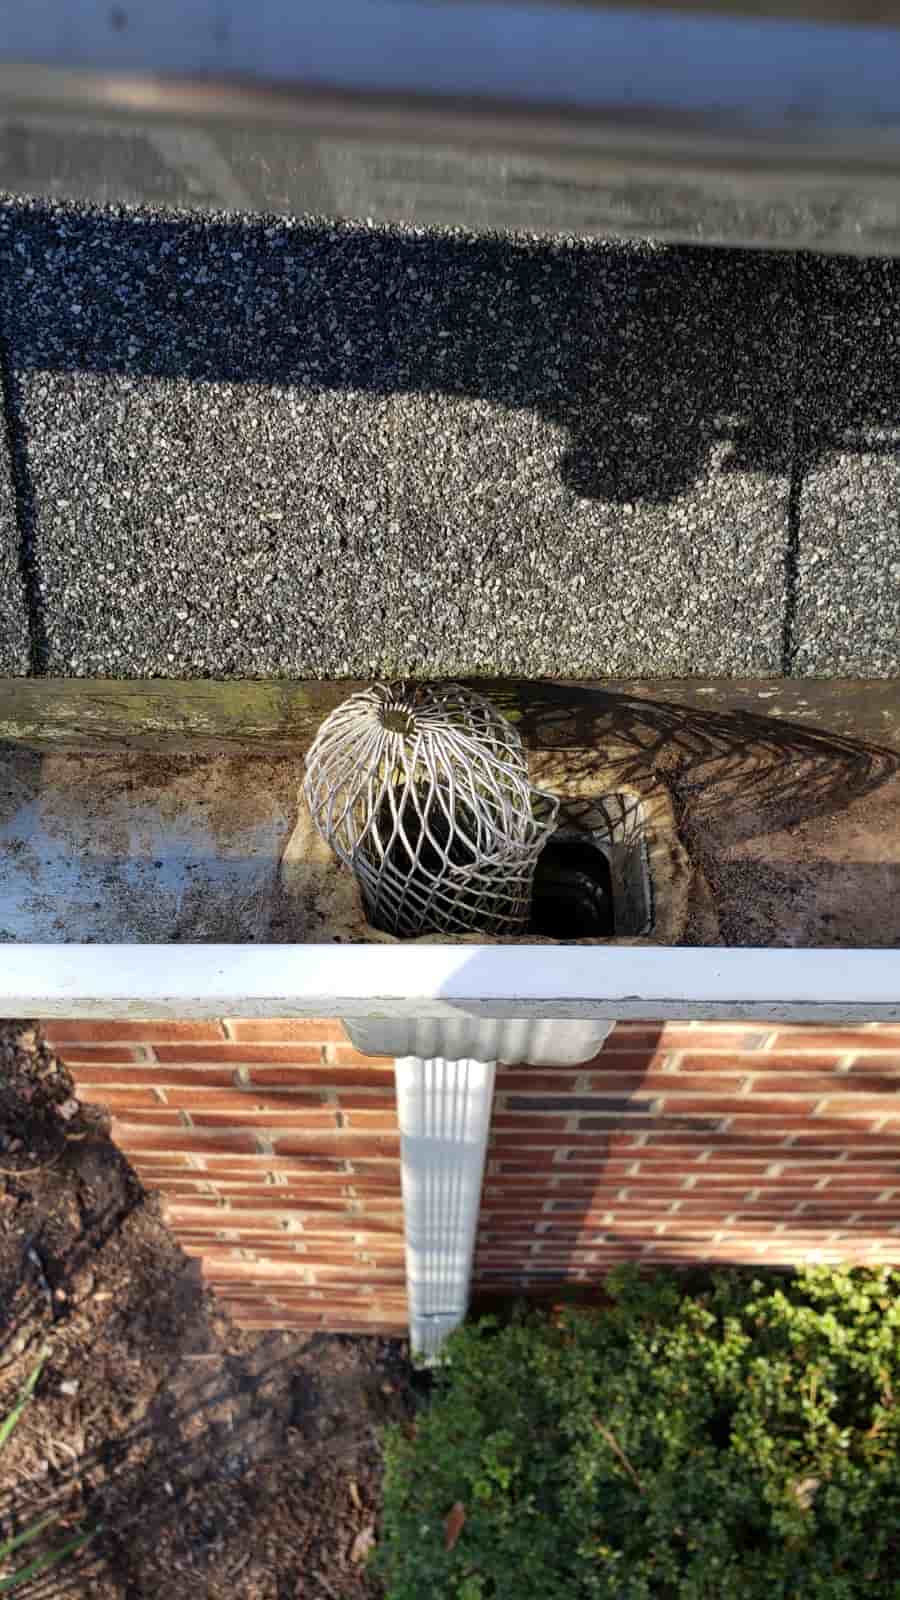 ladder attachment for cleaning gutters